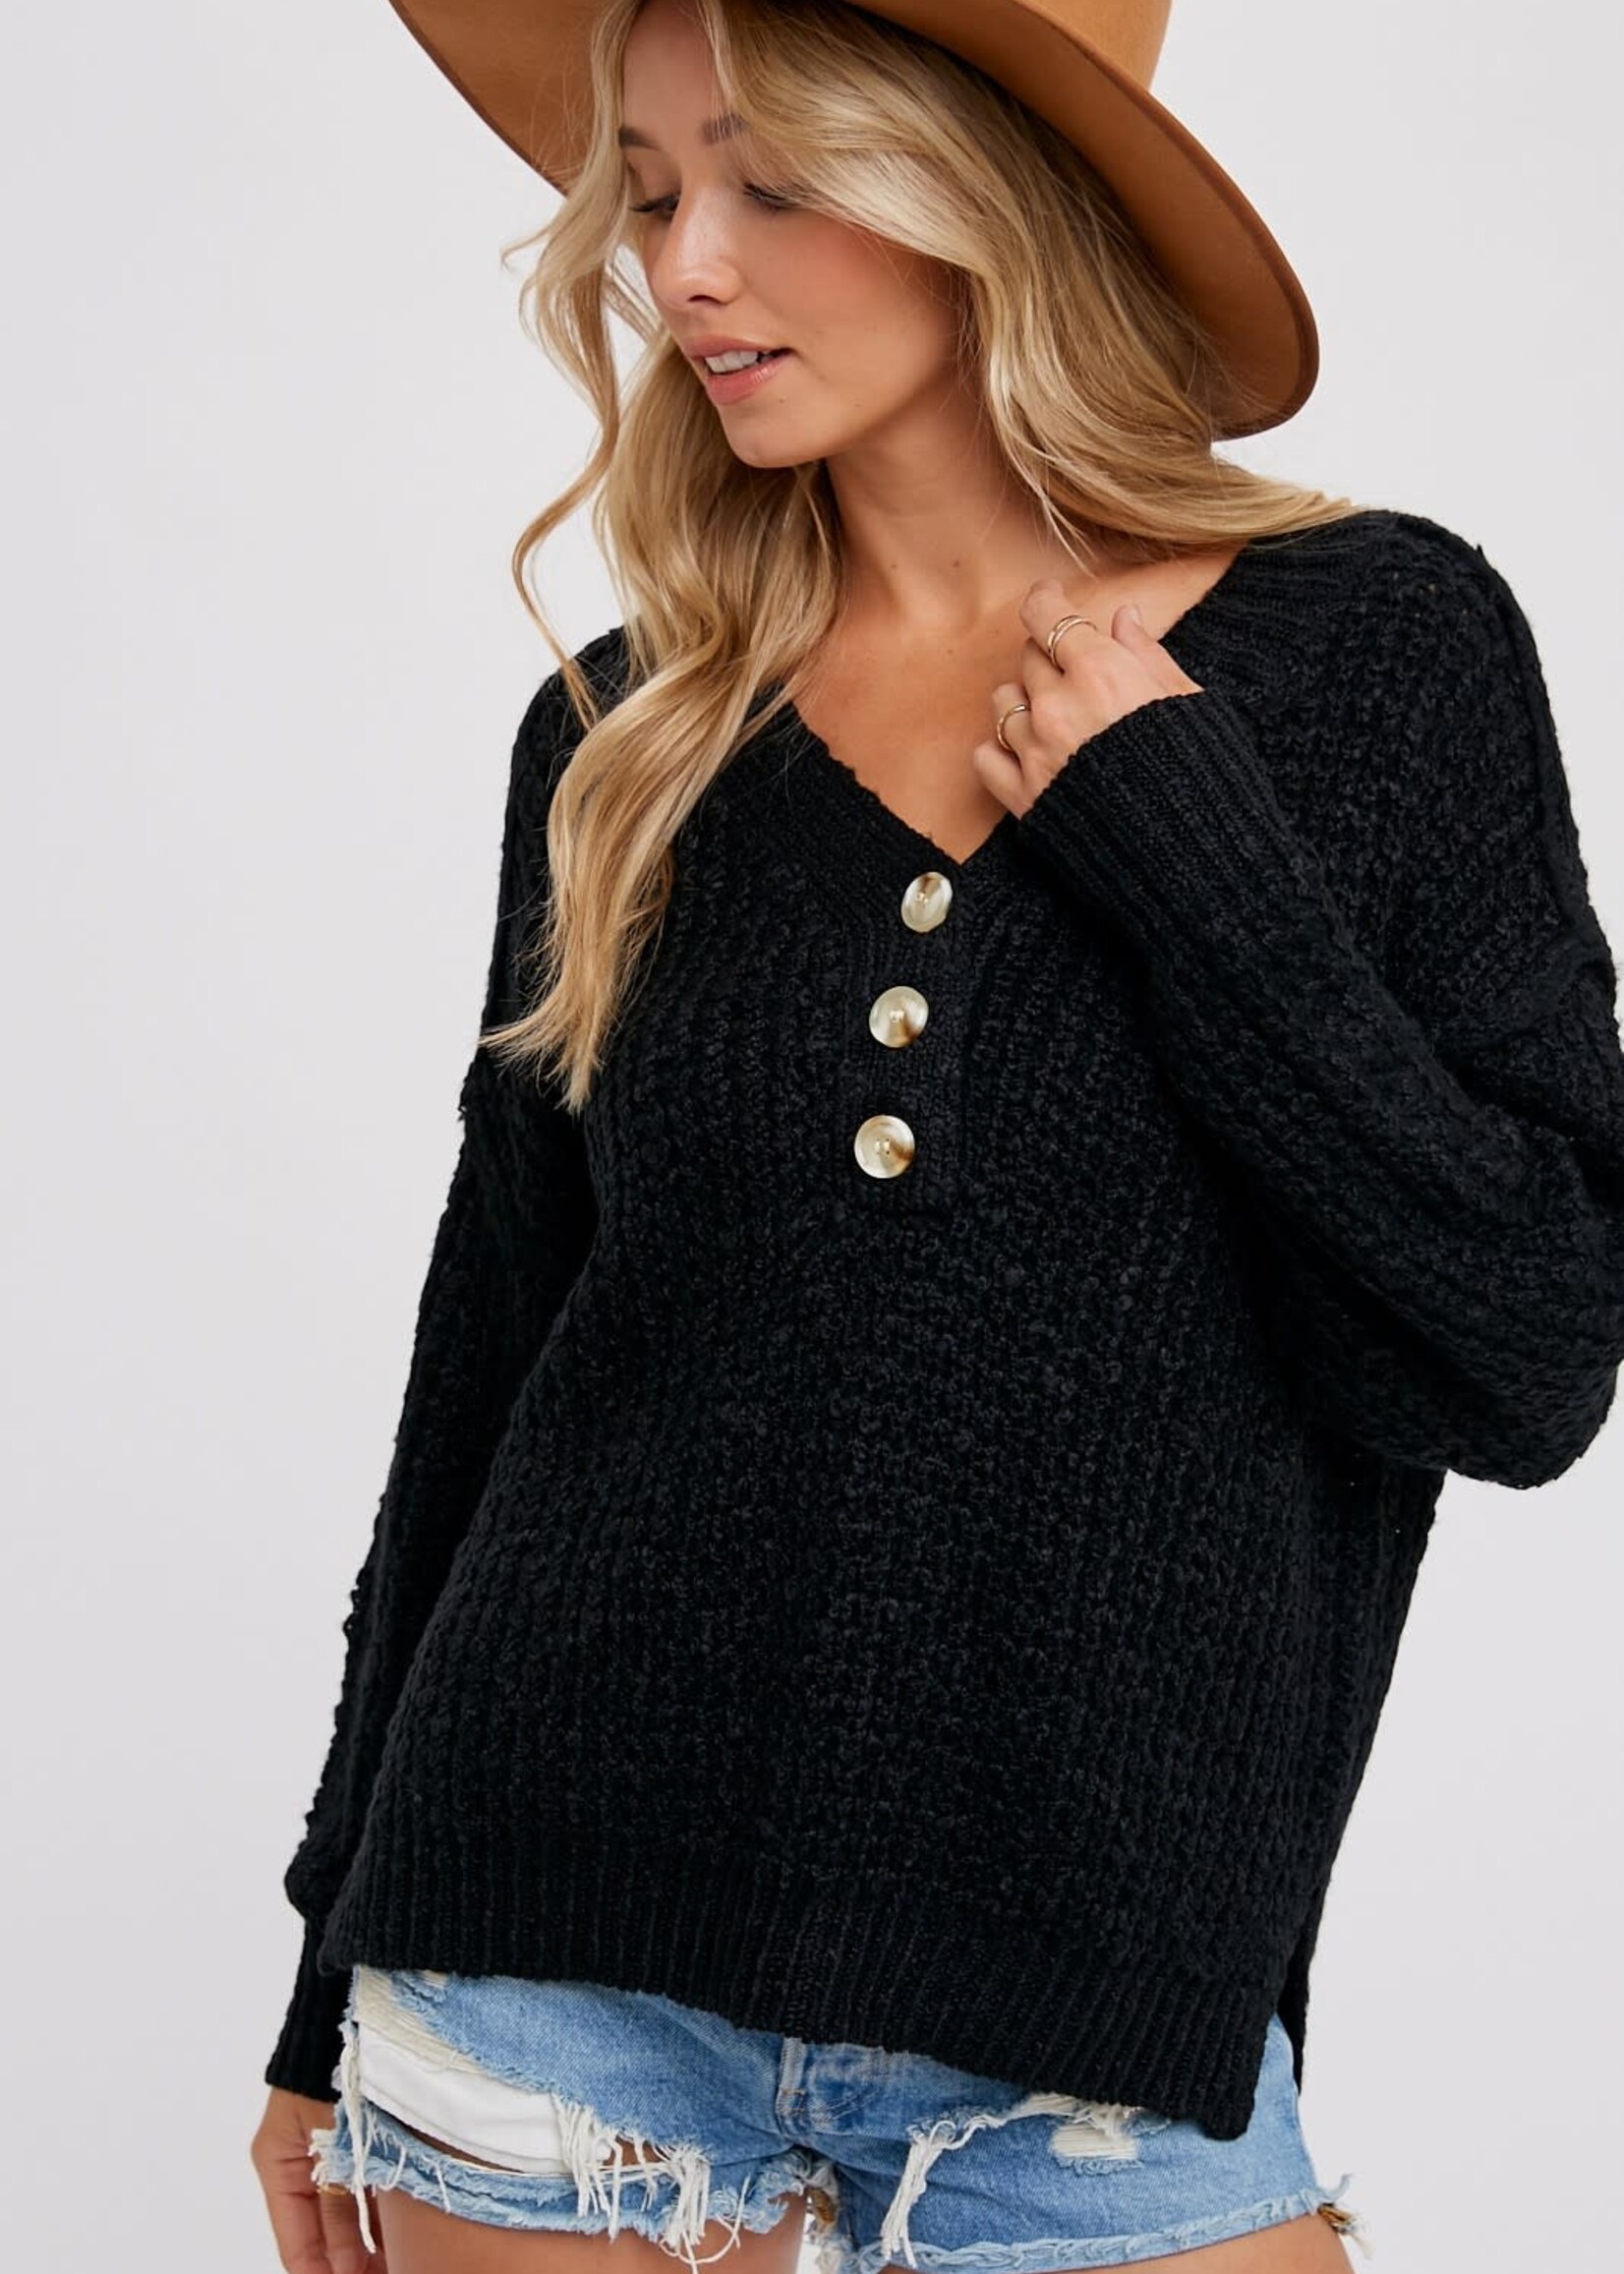 Relaxed fit thermal Henley sweater